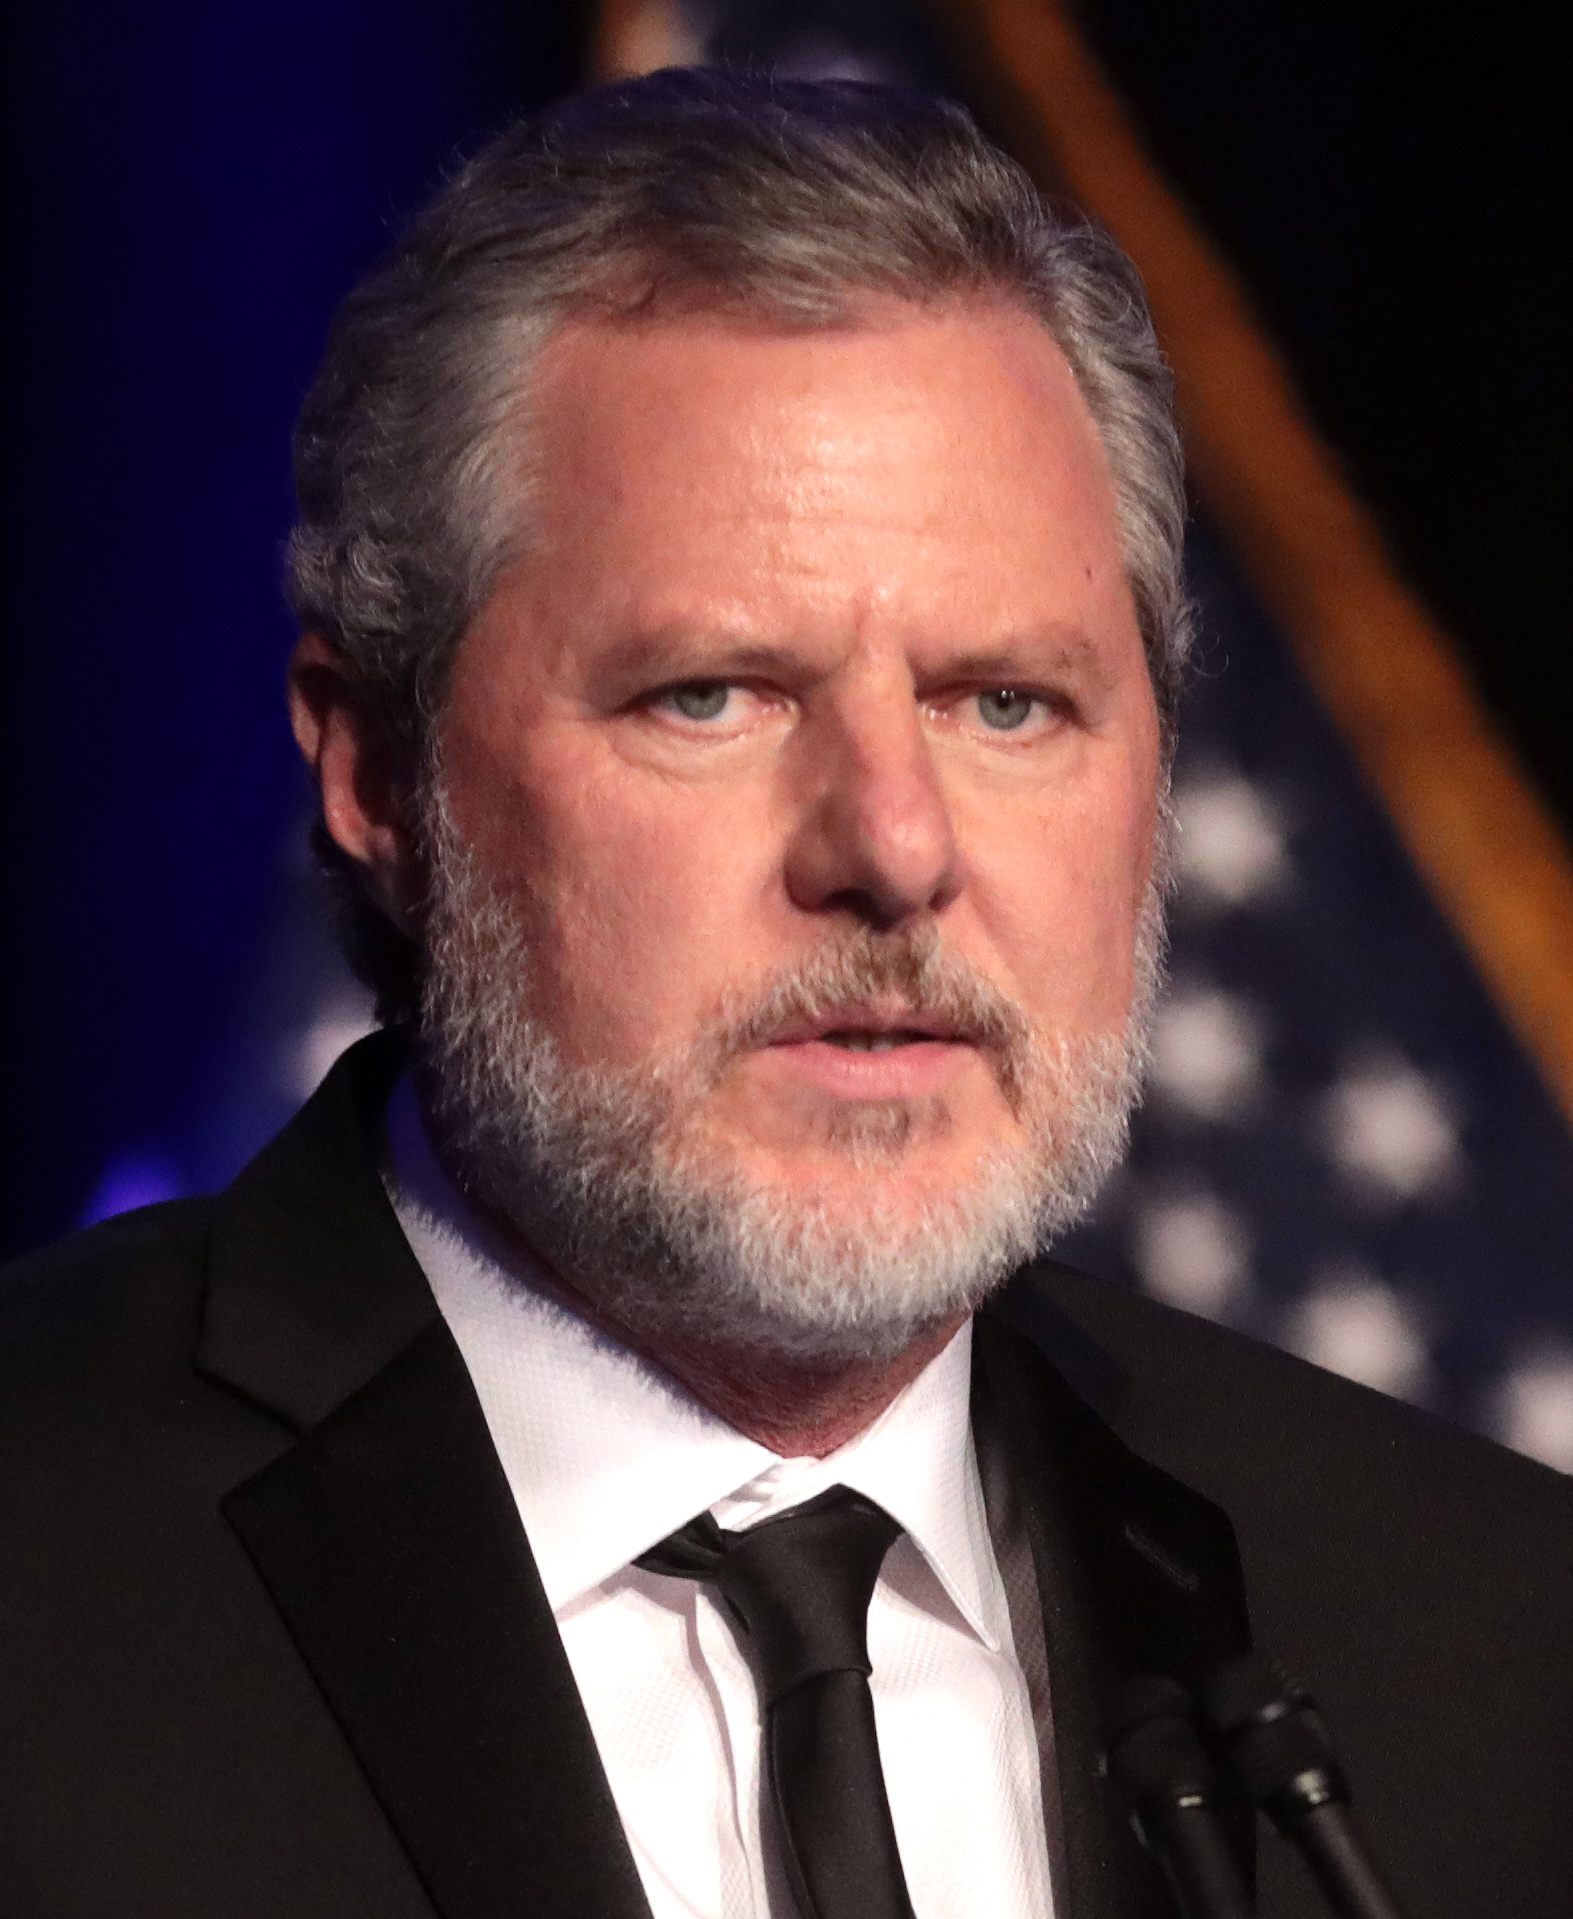 What’s up with Jerry Falwell Jr.?